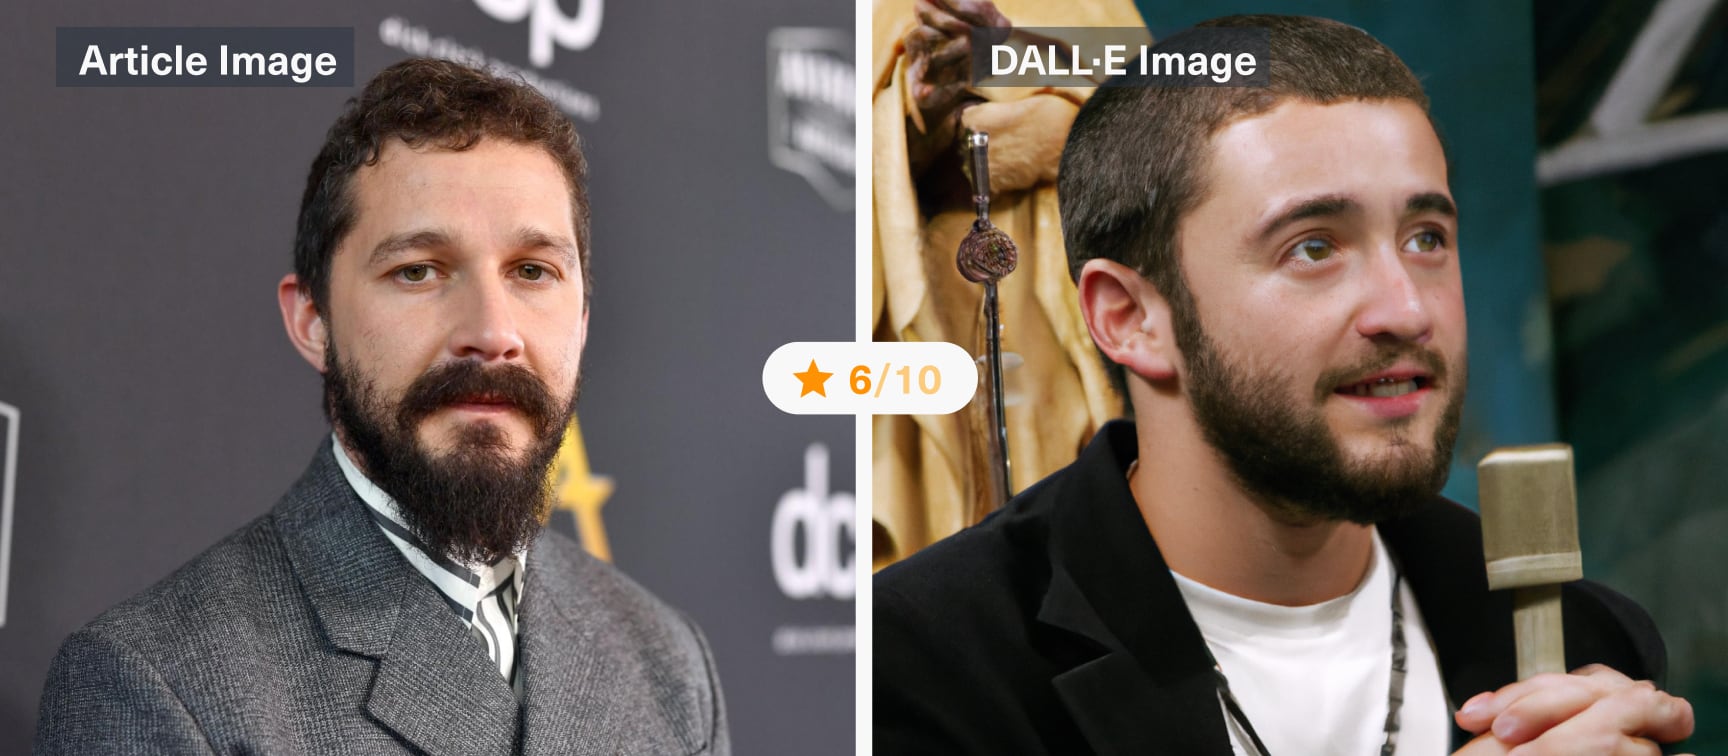 DALL-E meets News API: Shia LaBeouf converts to Catholicism after studying for 'Padre Pio' movie